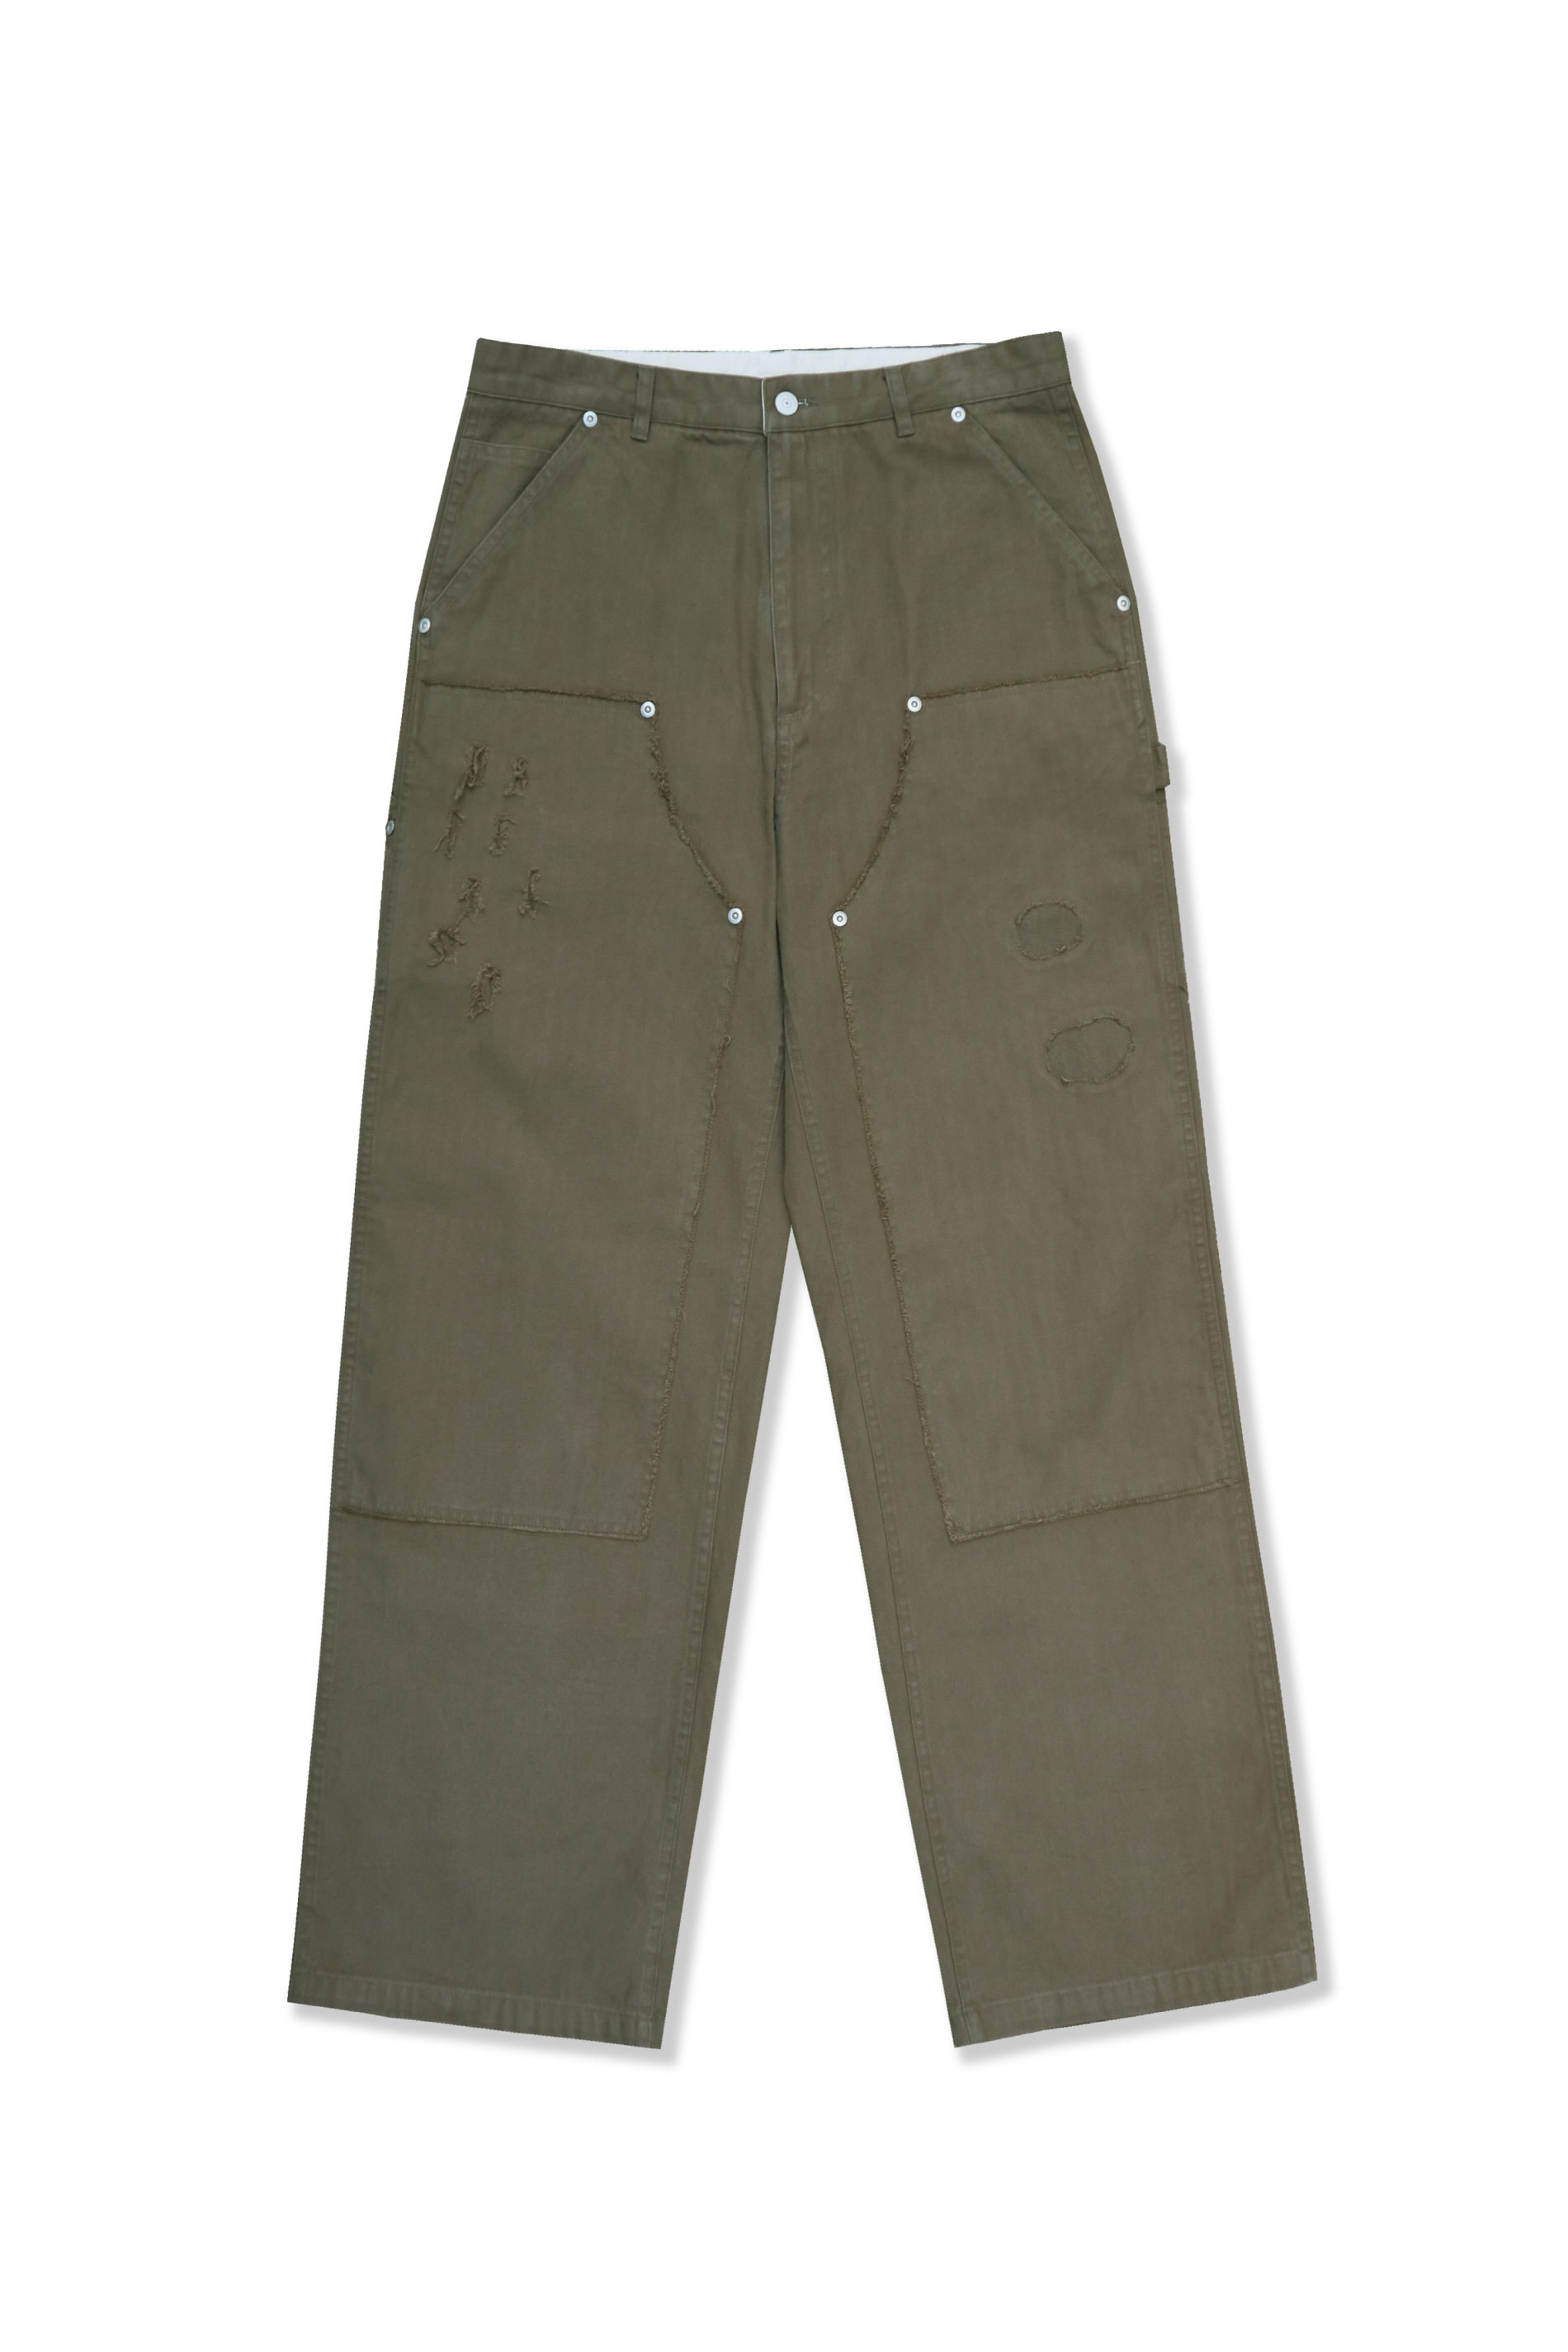 double knee pants_olive